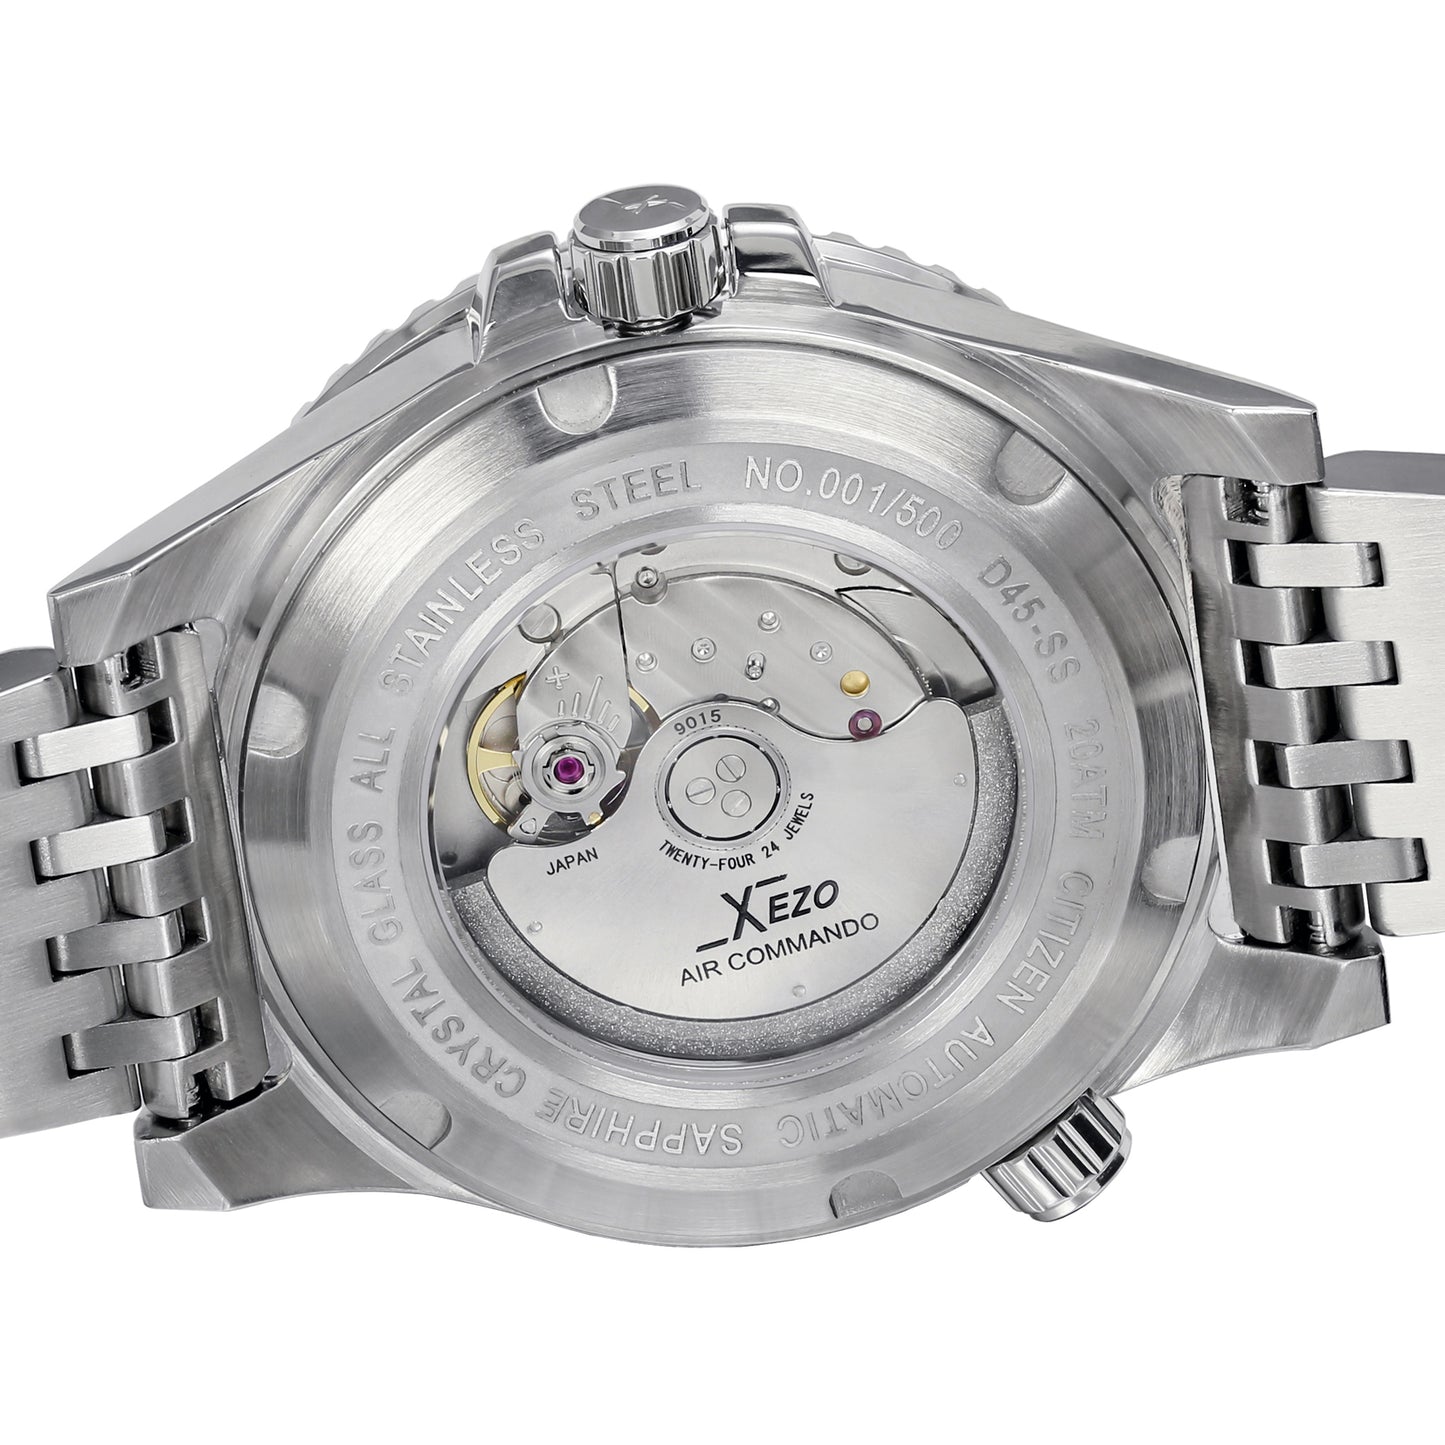 Xezo - Back case of the Air Commando D45-SS watch